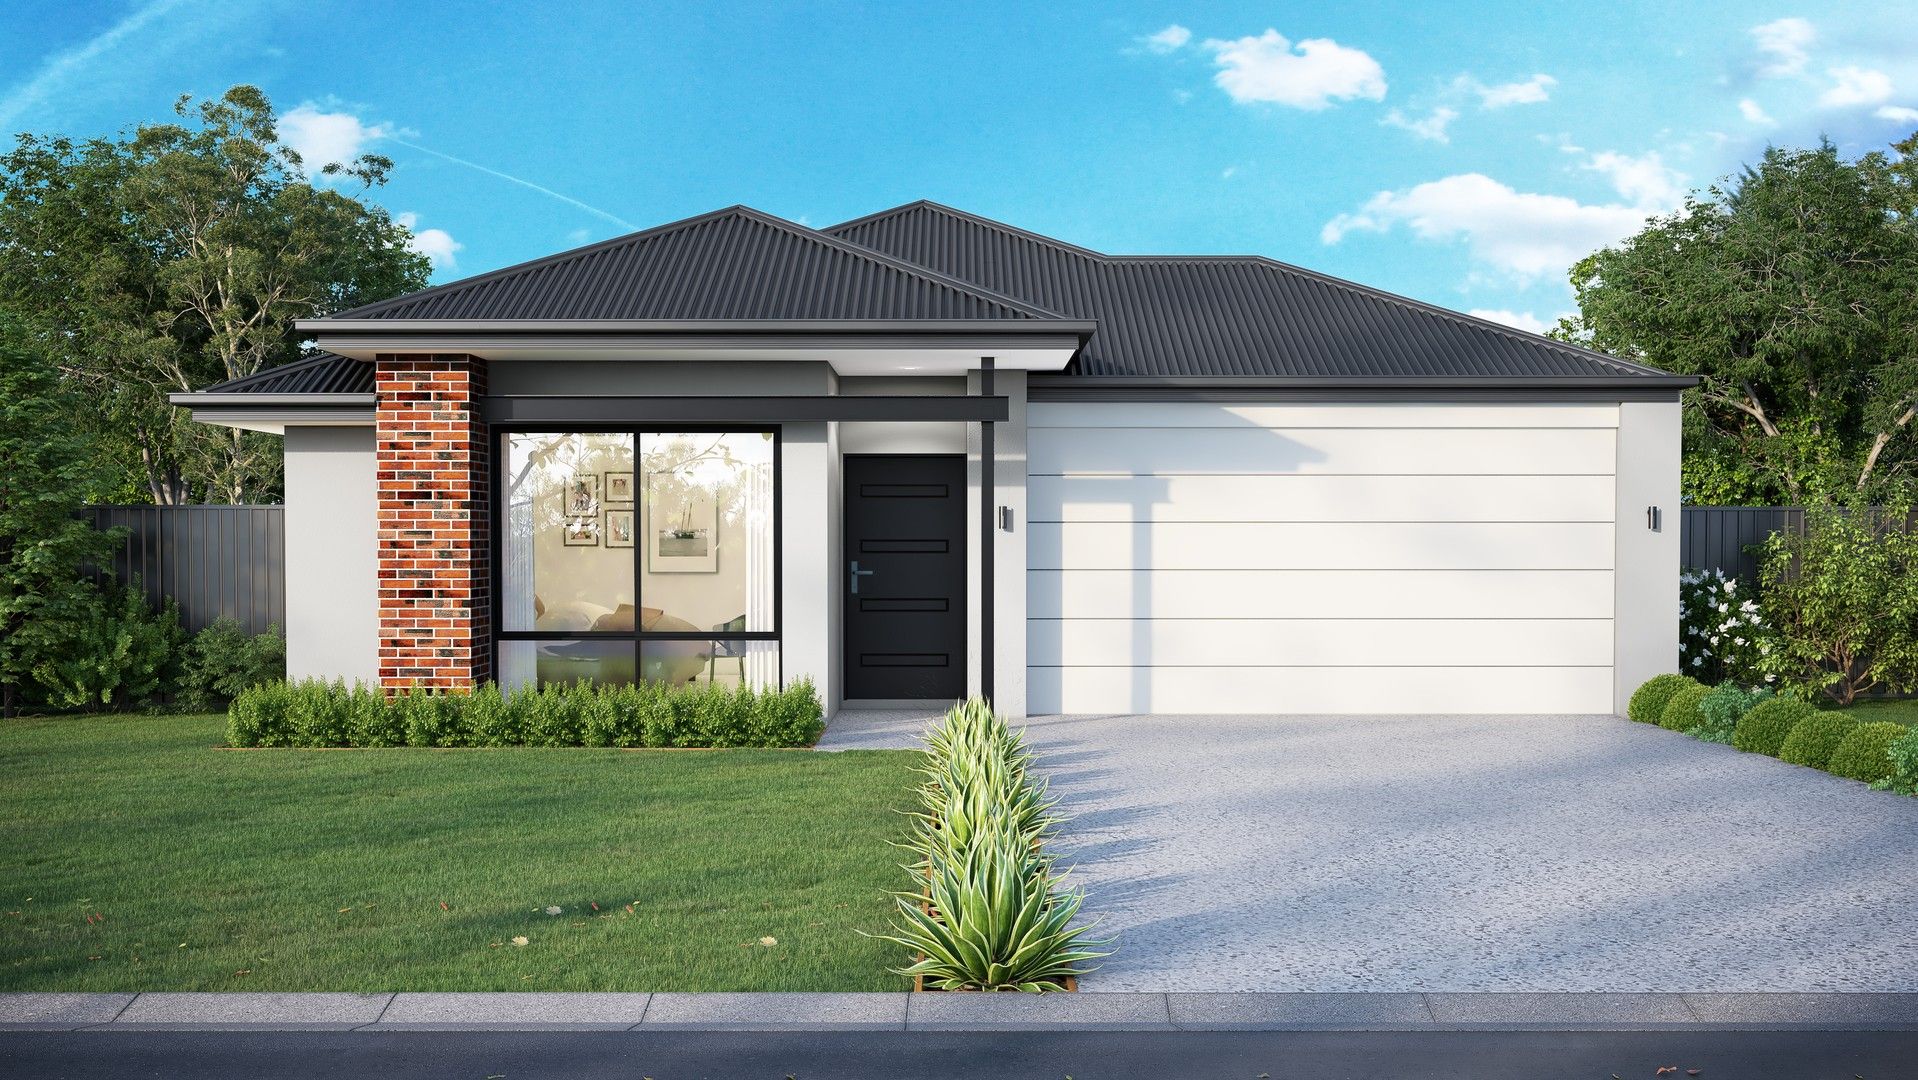 4 bedrooms New House & Land in  FORRESTDALE WA, 6112